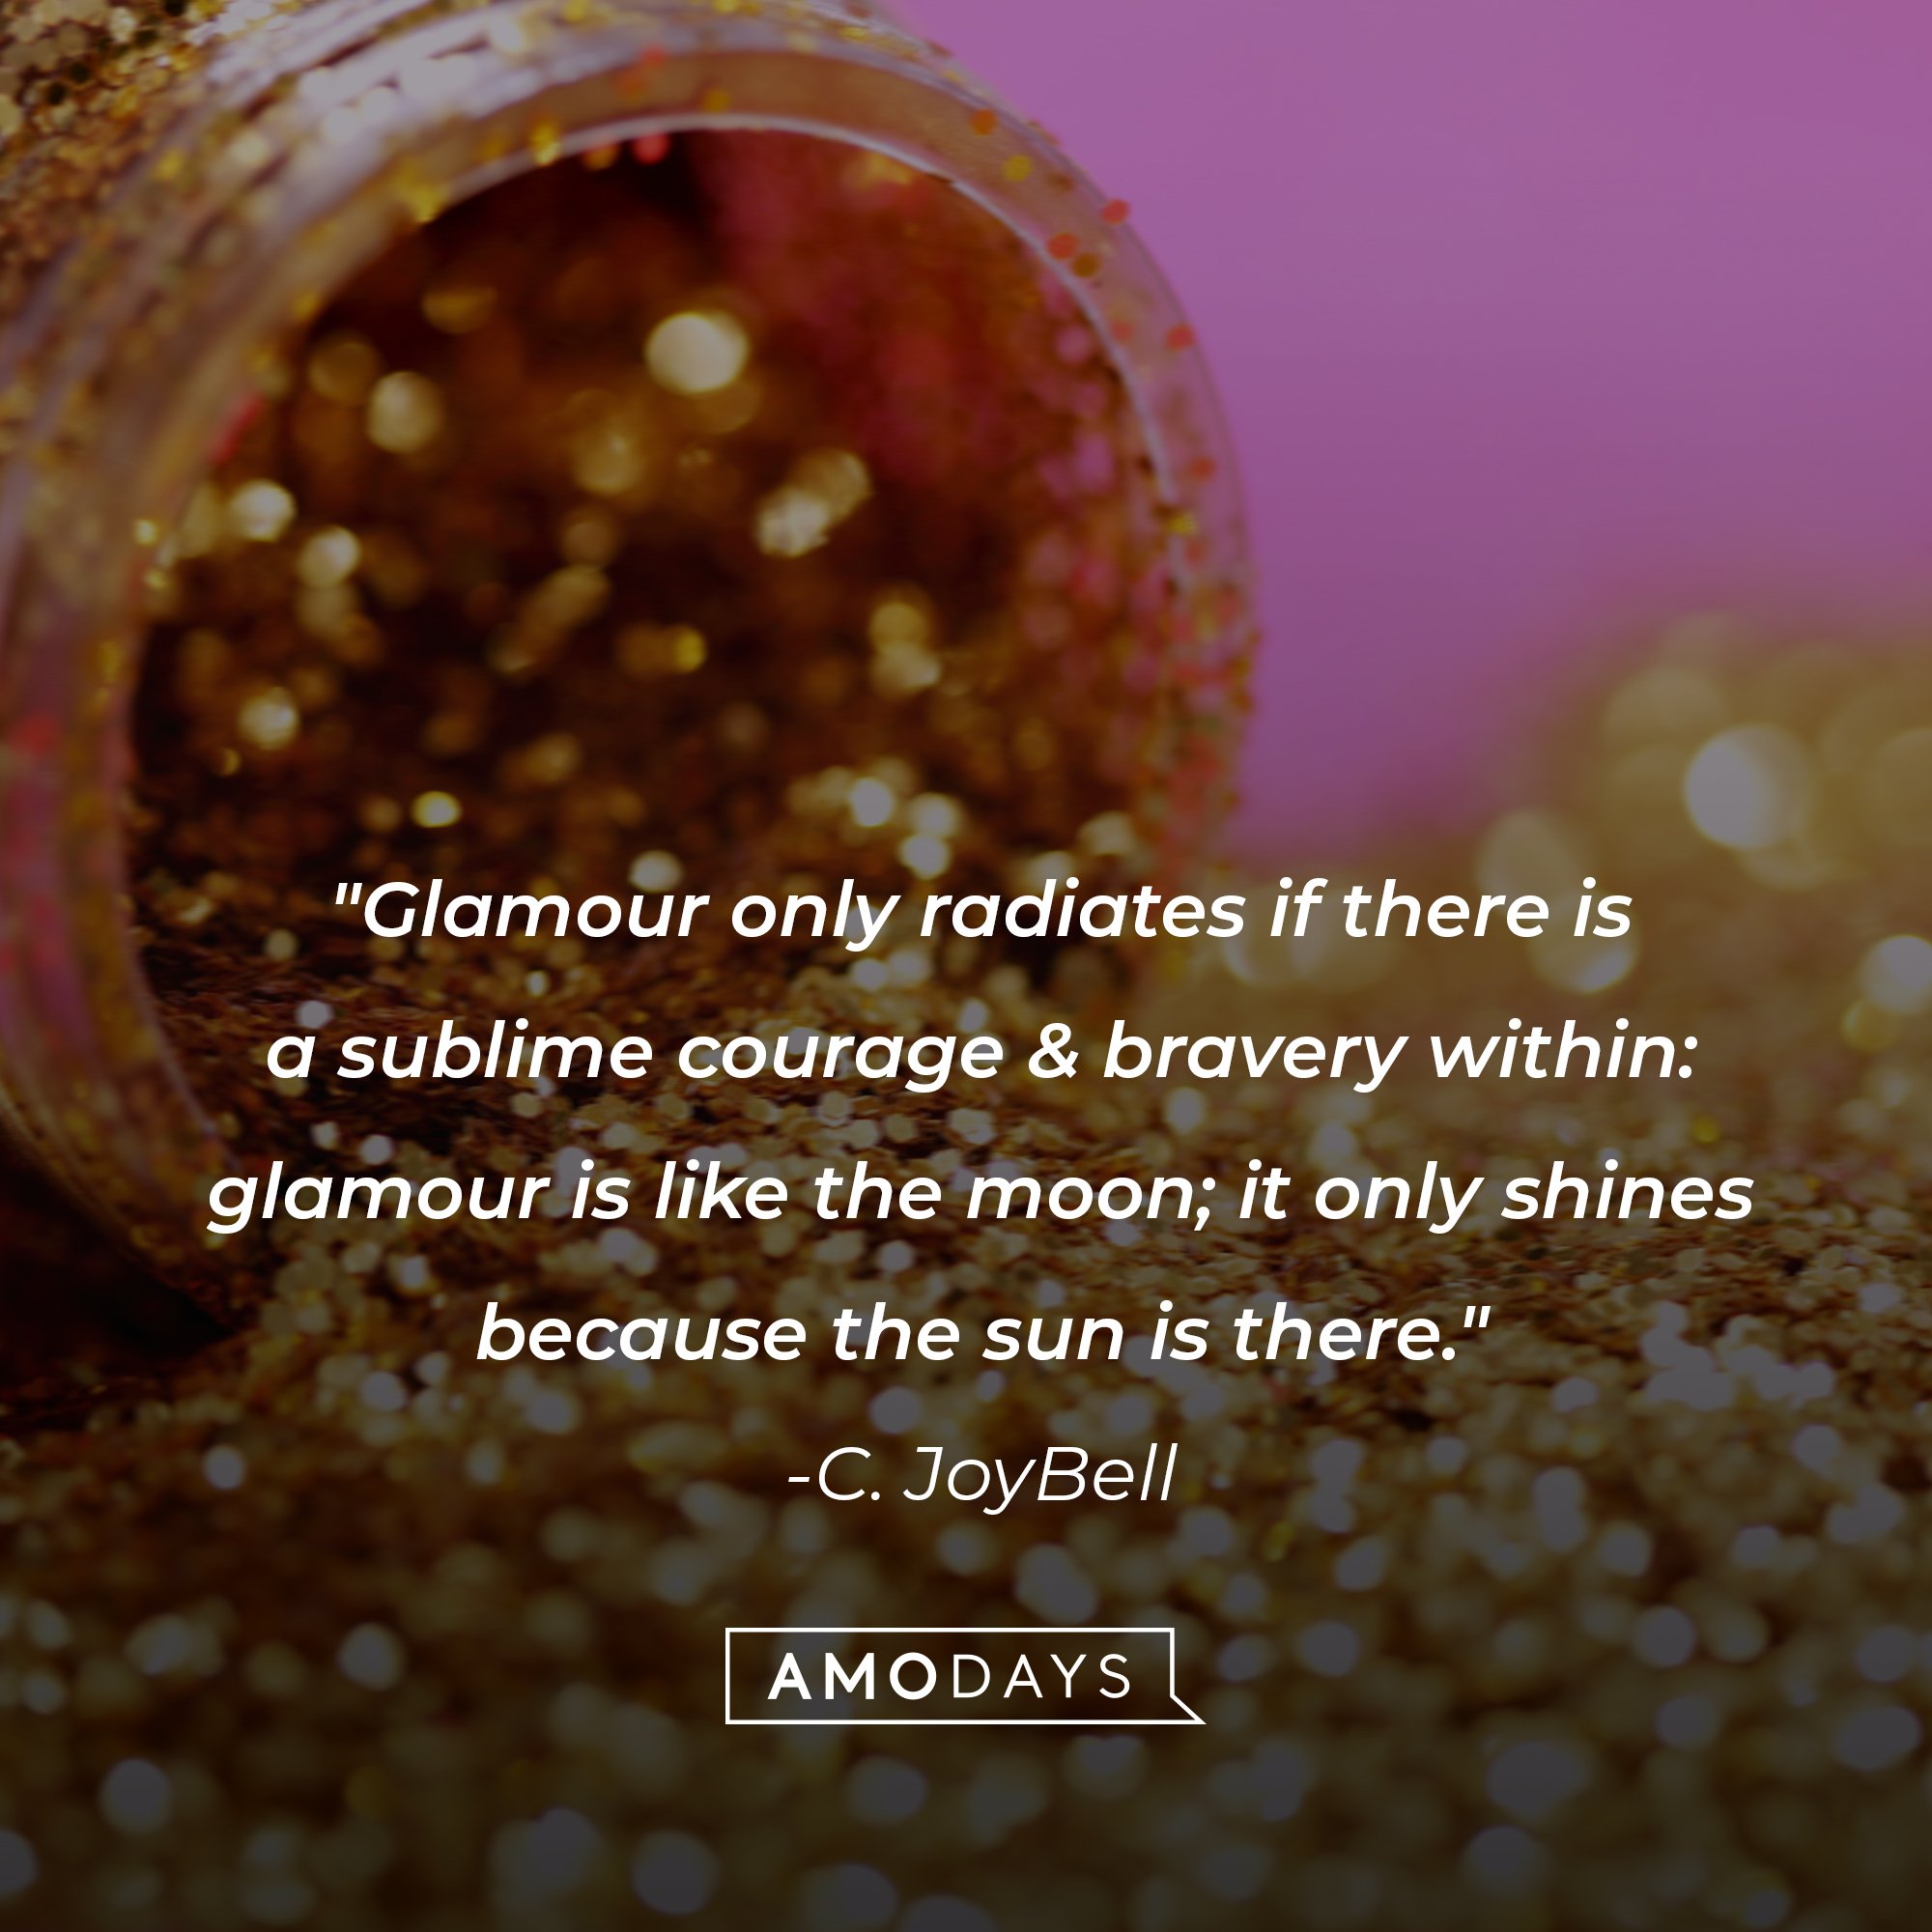 C. JoyBell ‘s quote: "Glamour only radiates if there is a sublime courage & bravery within: glamour is like the moon; it only shines because the sun is there." | Image: AmoDays 